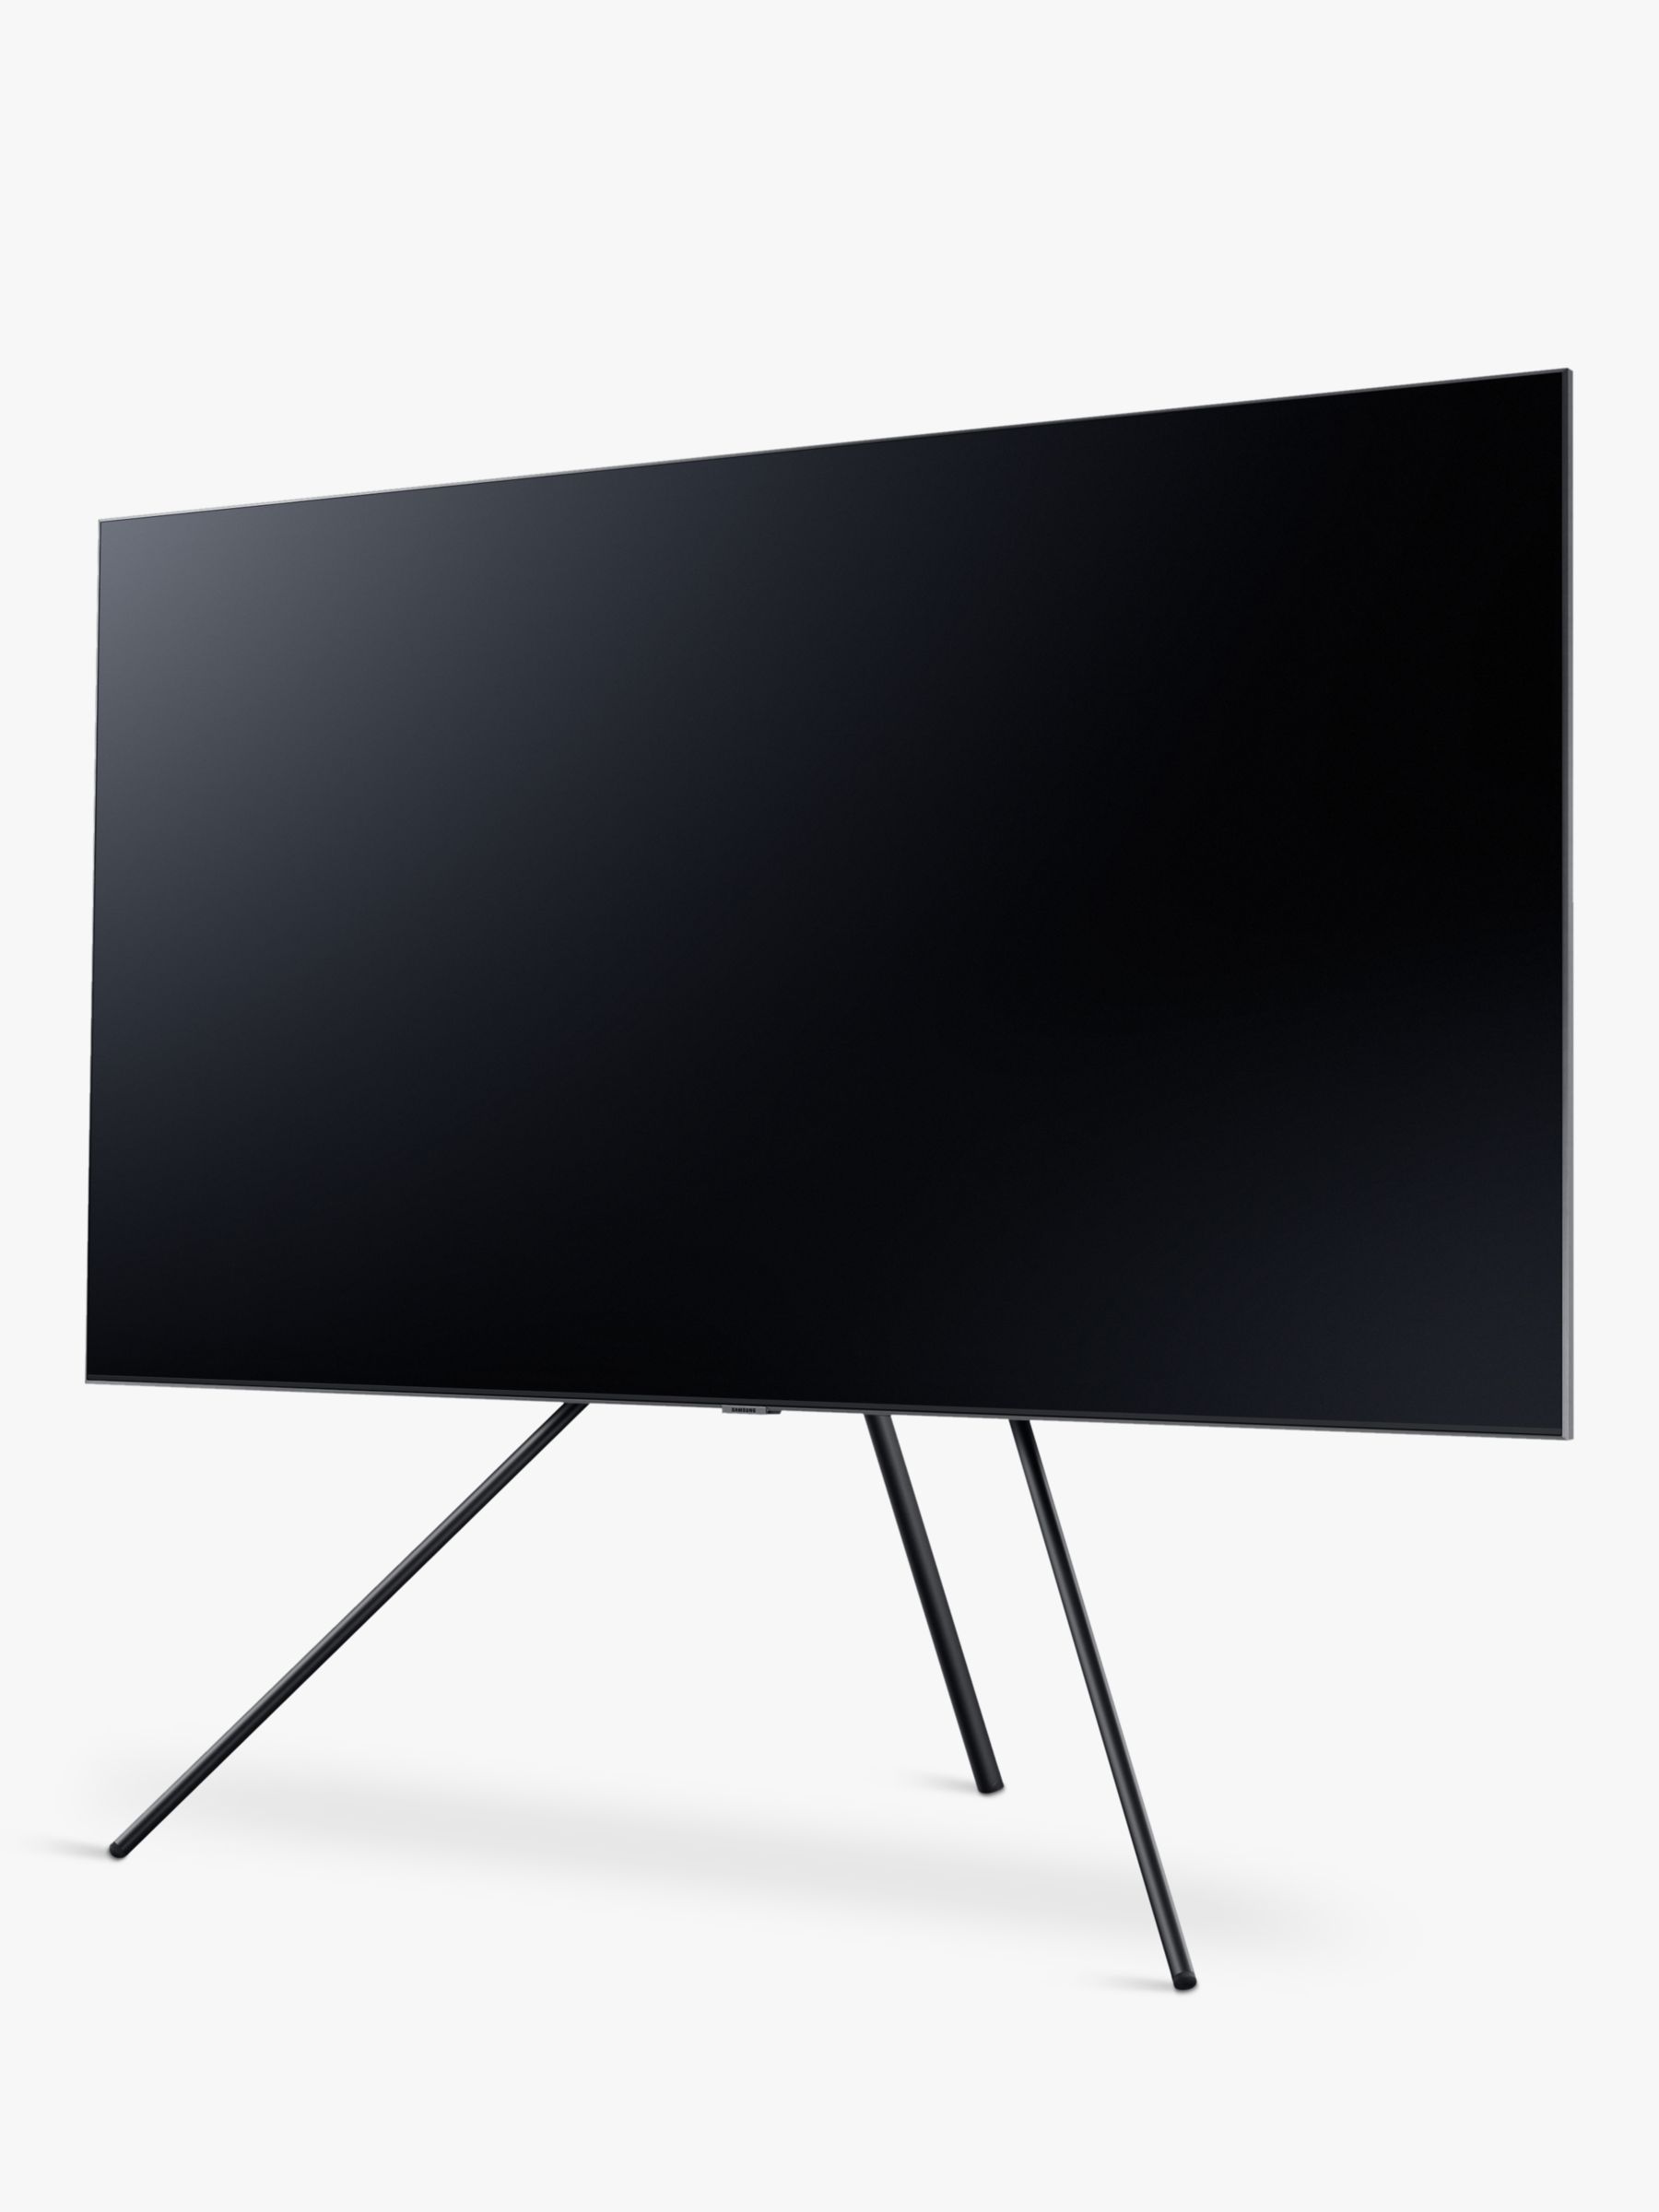 Samsung Studio Stand for QLED & The Frame 2020 TVs 43 inch to 65 inch at John Lewis & Partners